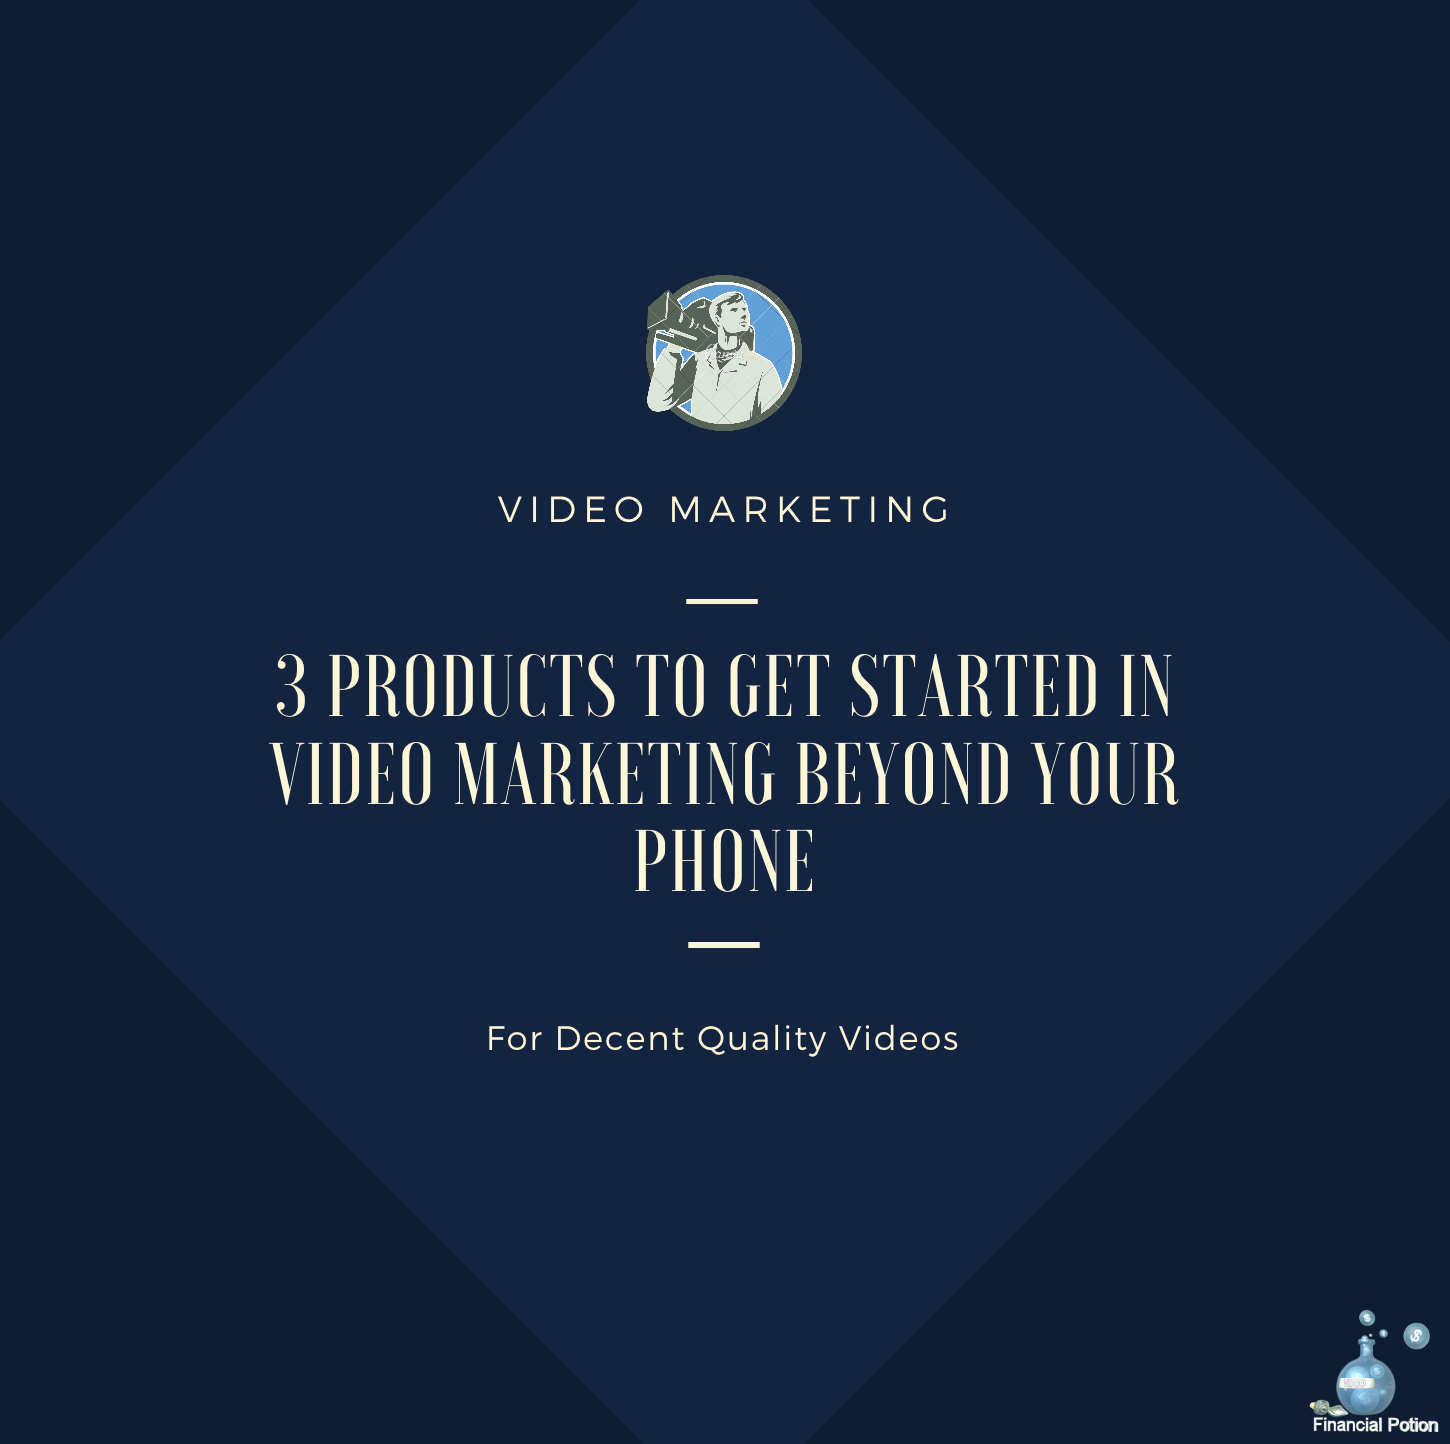 Video Marketing, Phone Videos, Quality Videos, Video Products